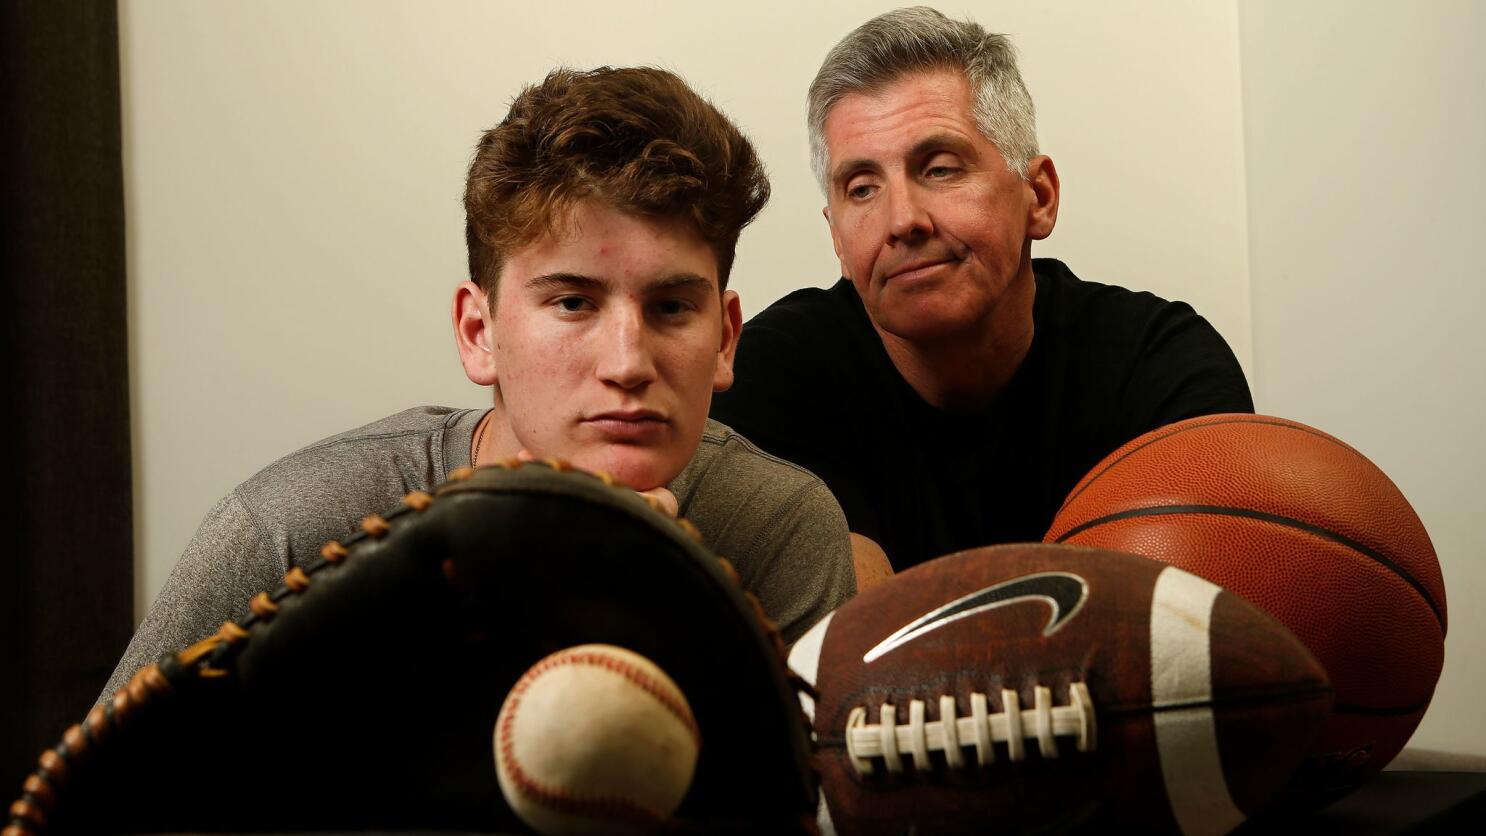 Youth and sports: Don't 'yank' kids for making mistakes